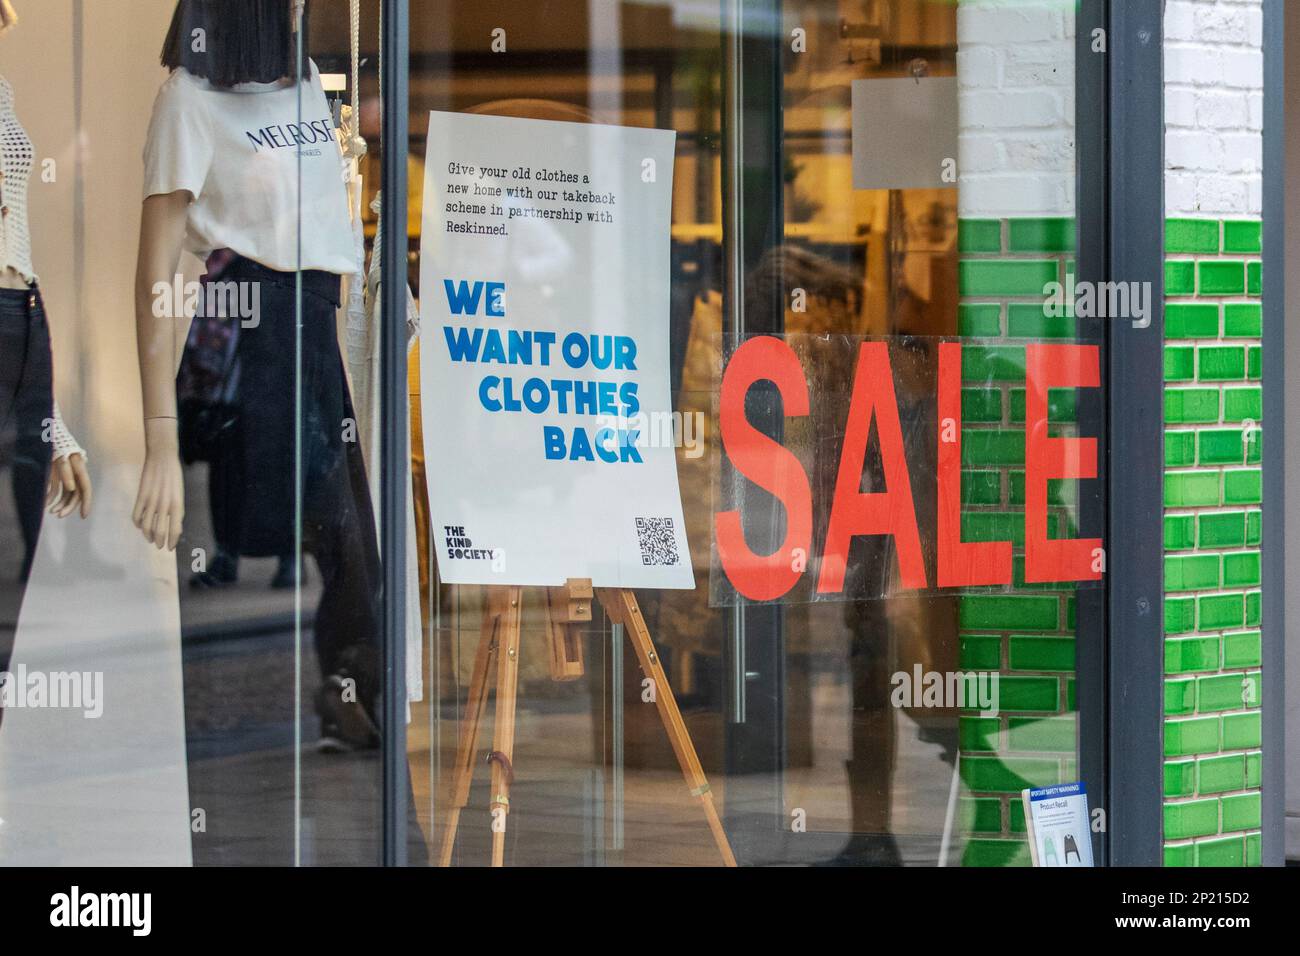 'We want our clothes back' Reskinned Recycling, Give unwanted clothes a new home by re-selling. Repurposing of old Clothes sign in River Island Fashion Store Sale in Fishergate, Preston Stock Photo